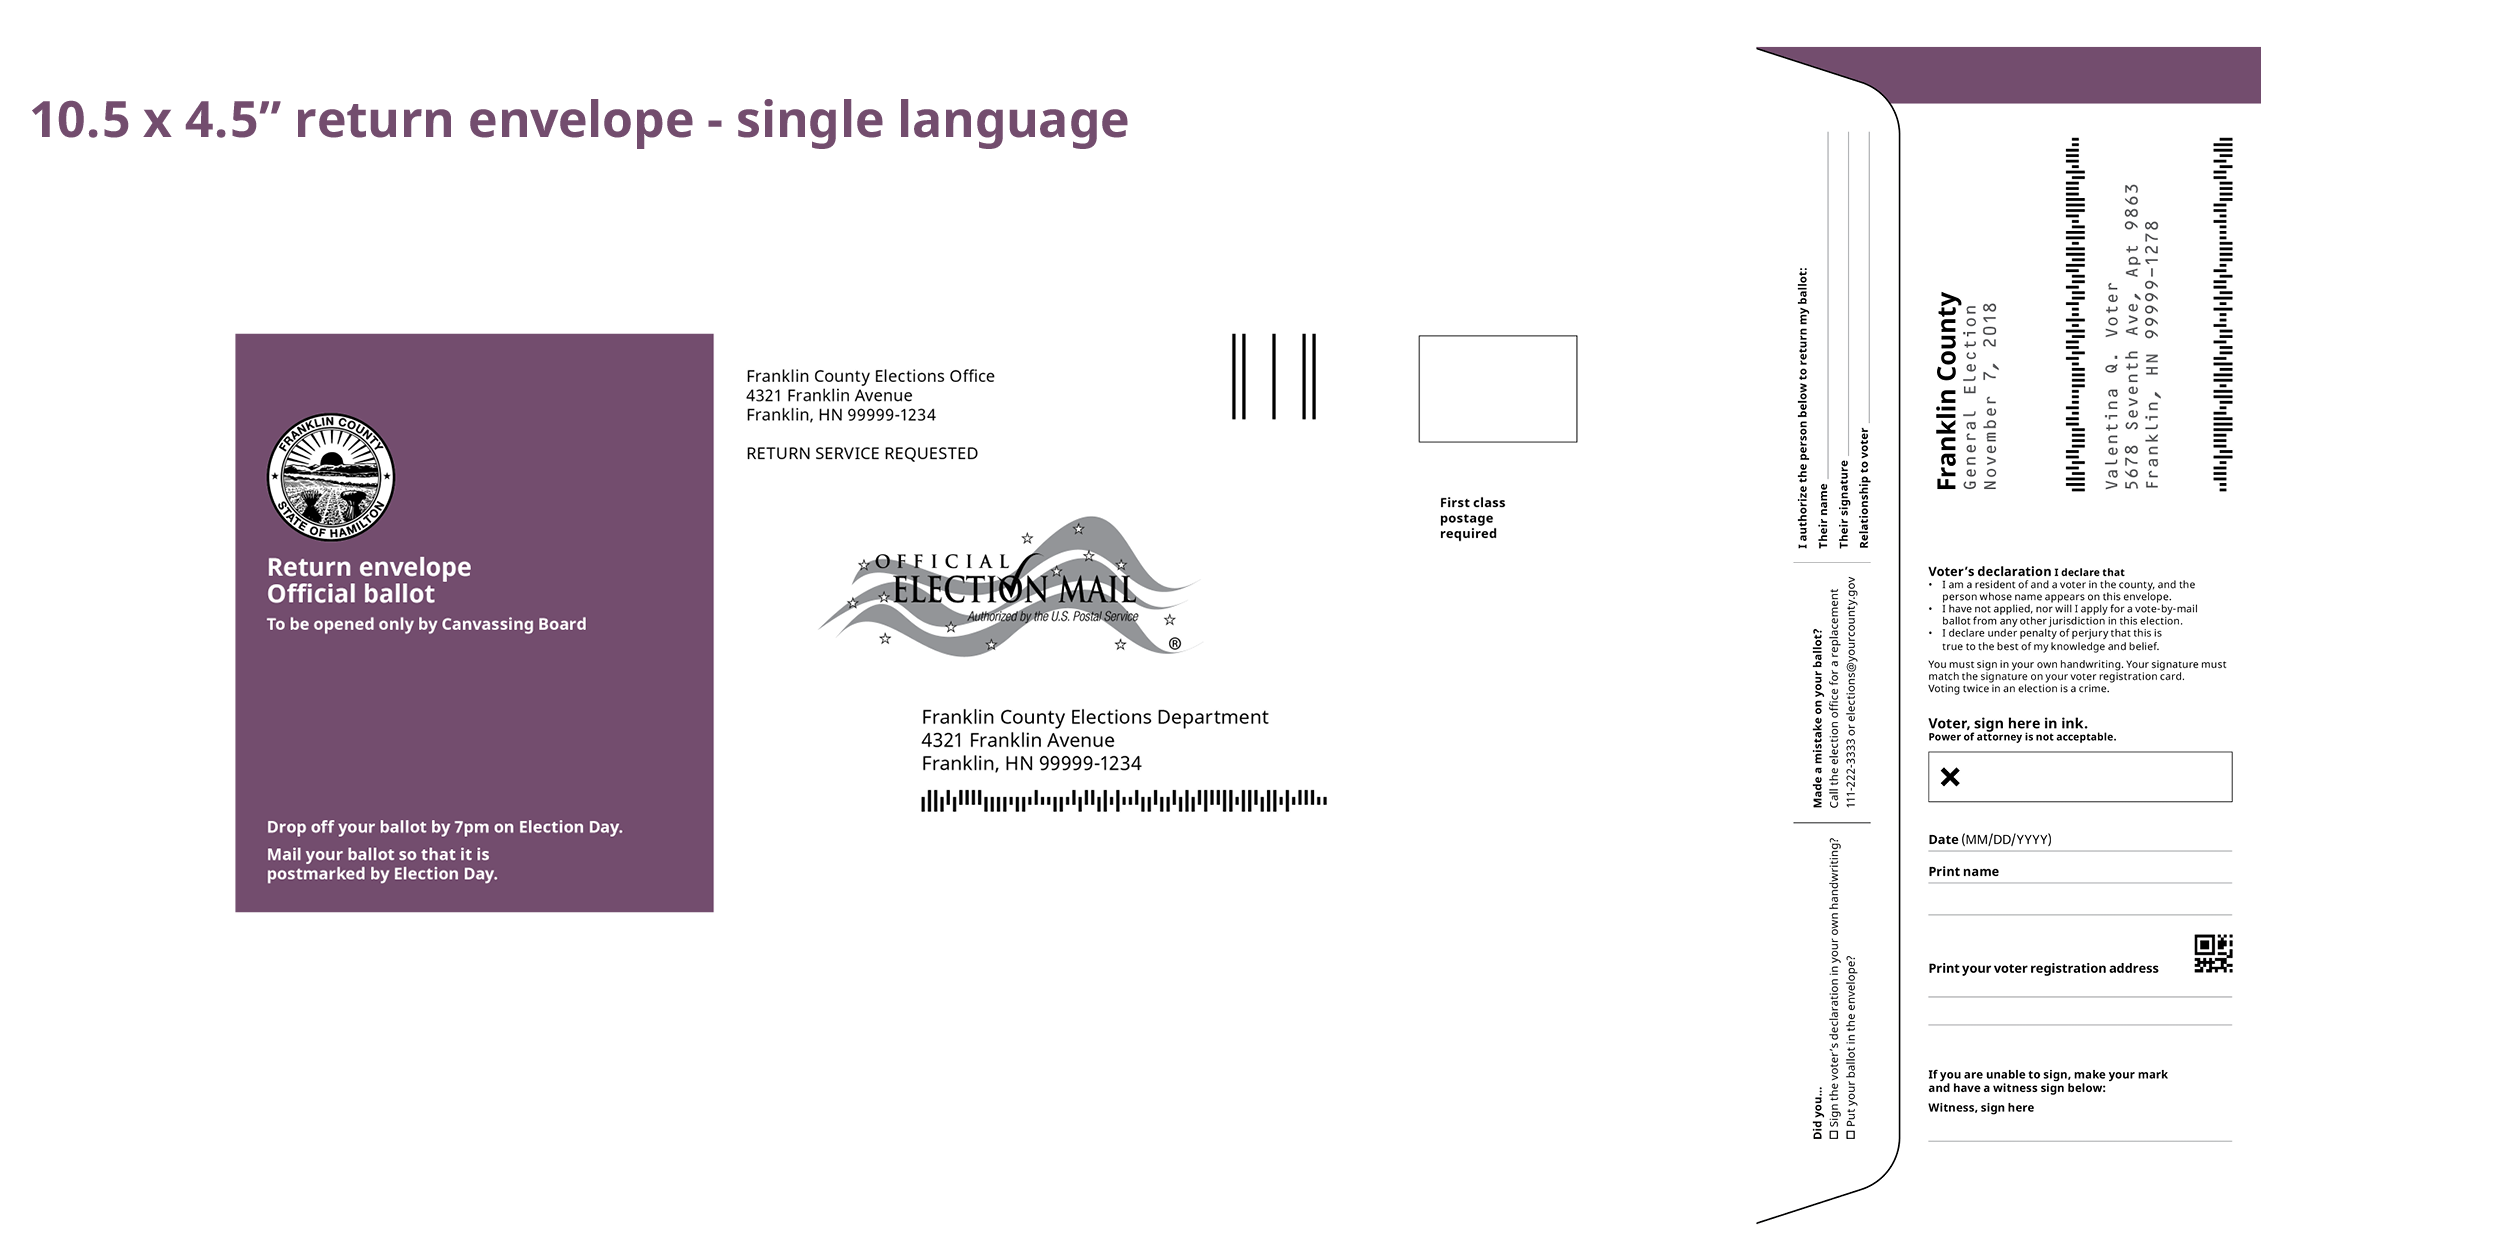 Images of front and back of return envelopes at 10.5x4.5 inches.